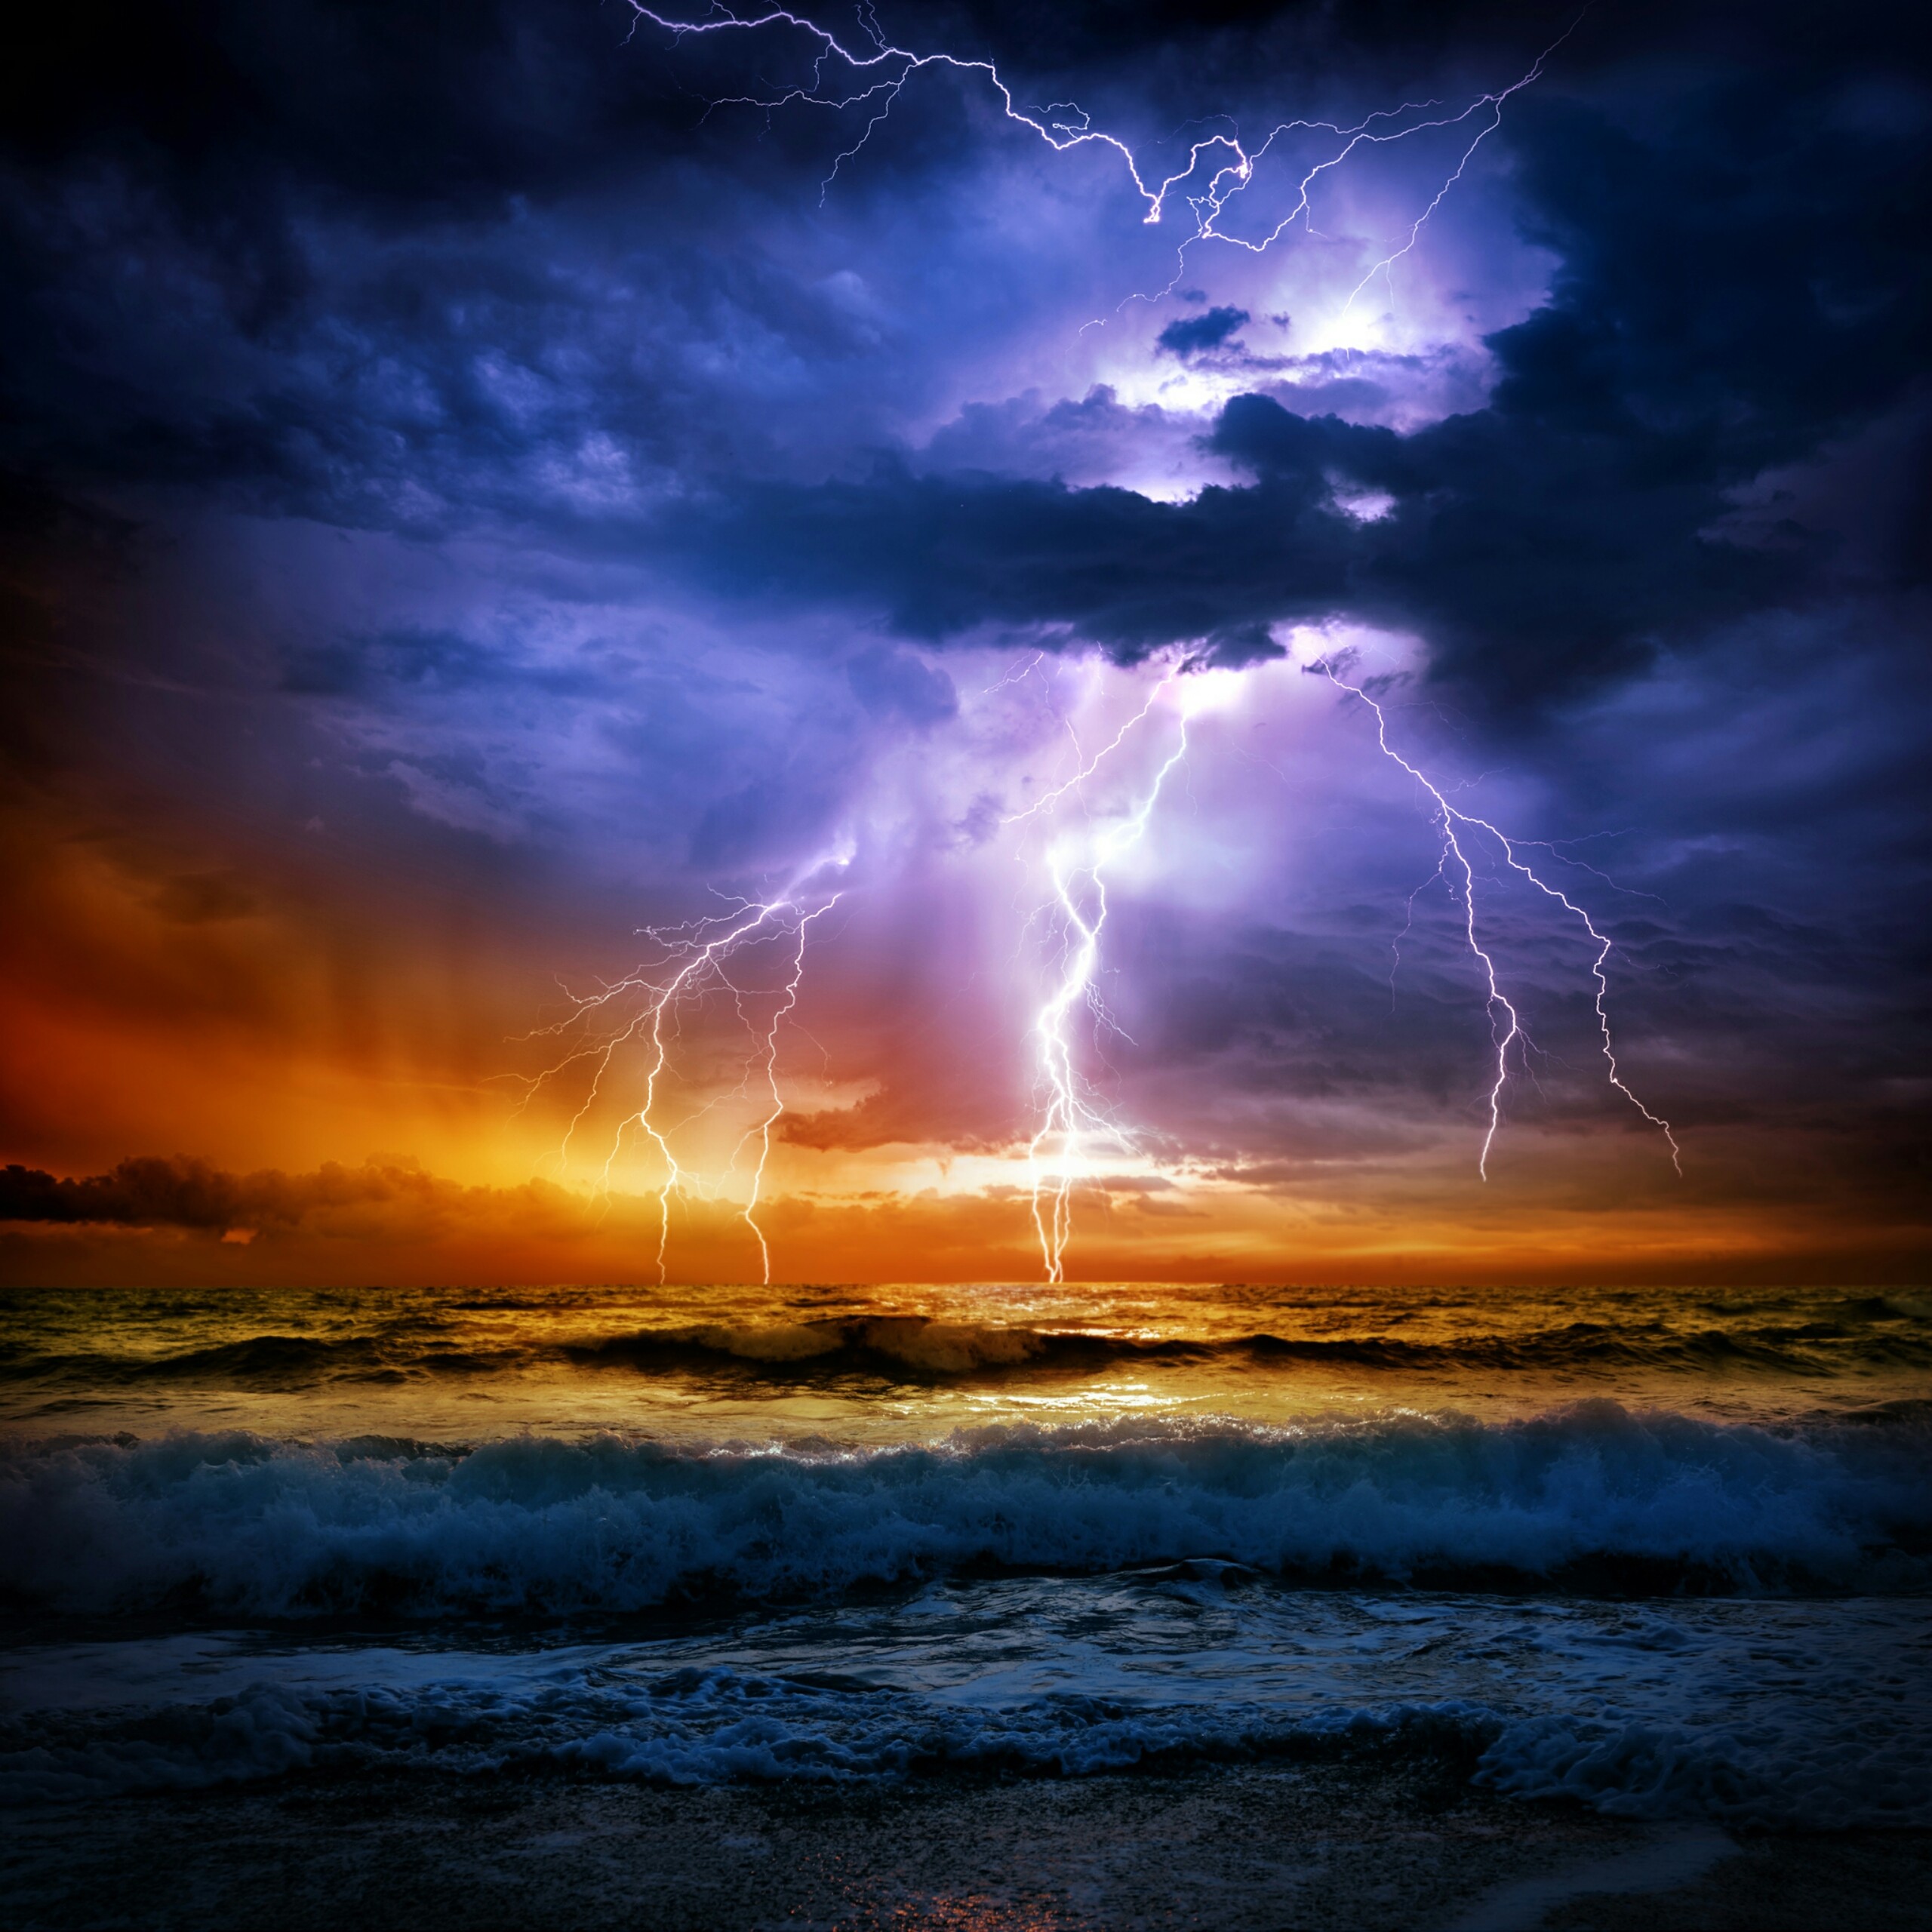 Lightening Strikes The Ocean On A Stormy Night Qhd - Extreme Weather , HD Wallpaper & Backgrounds